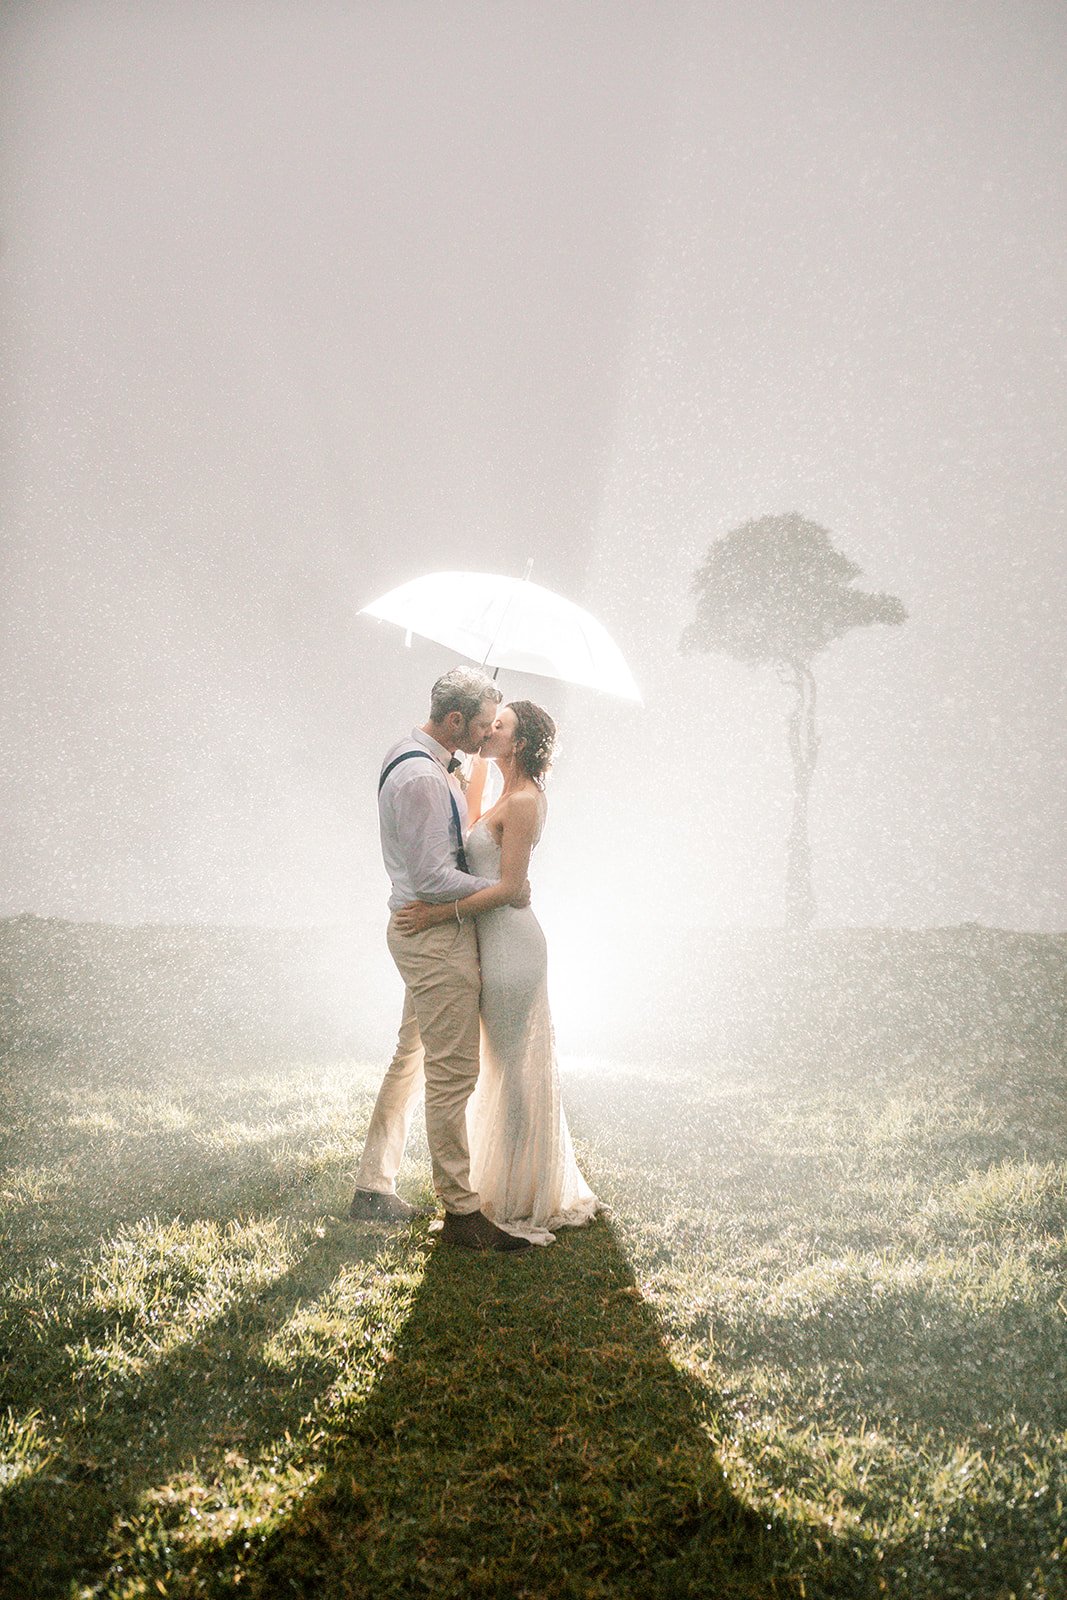 A bride and groom stand under a clear umbrella on a rainy wedding day in Maleny